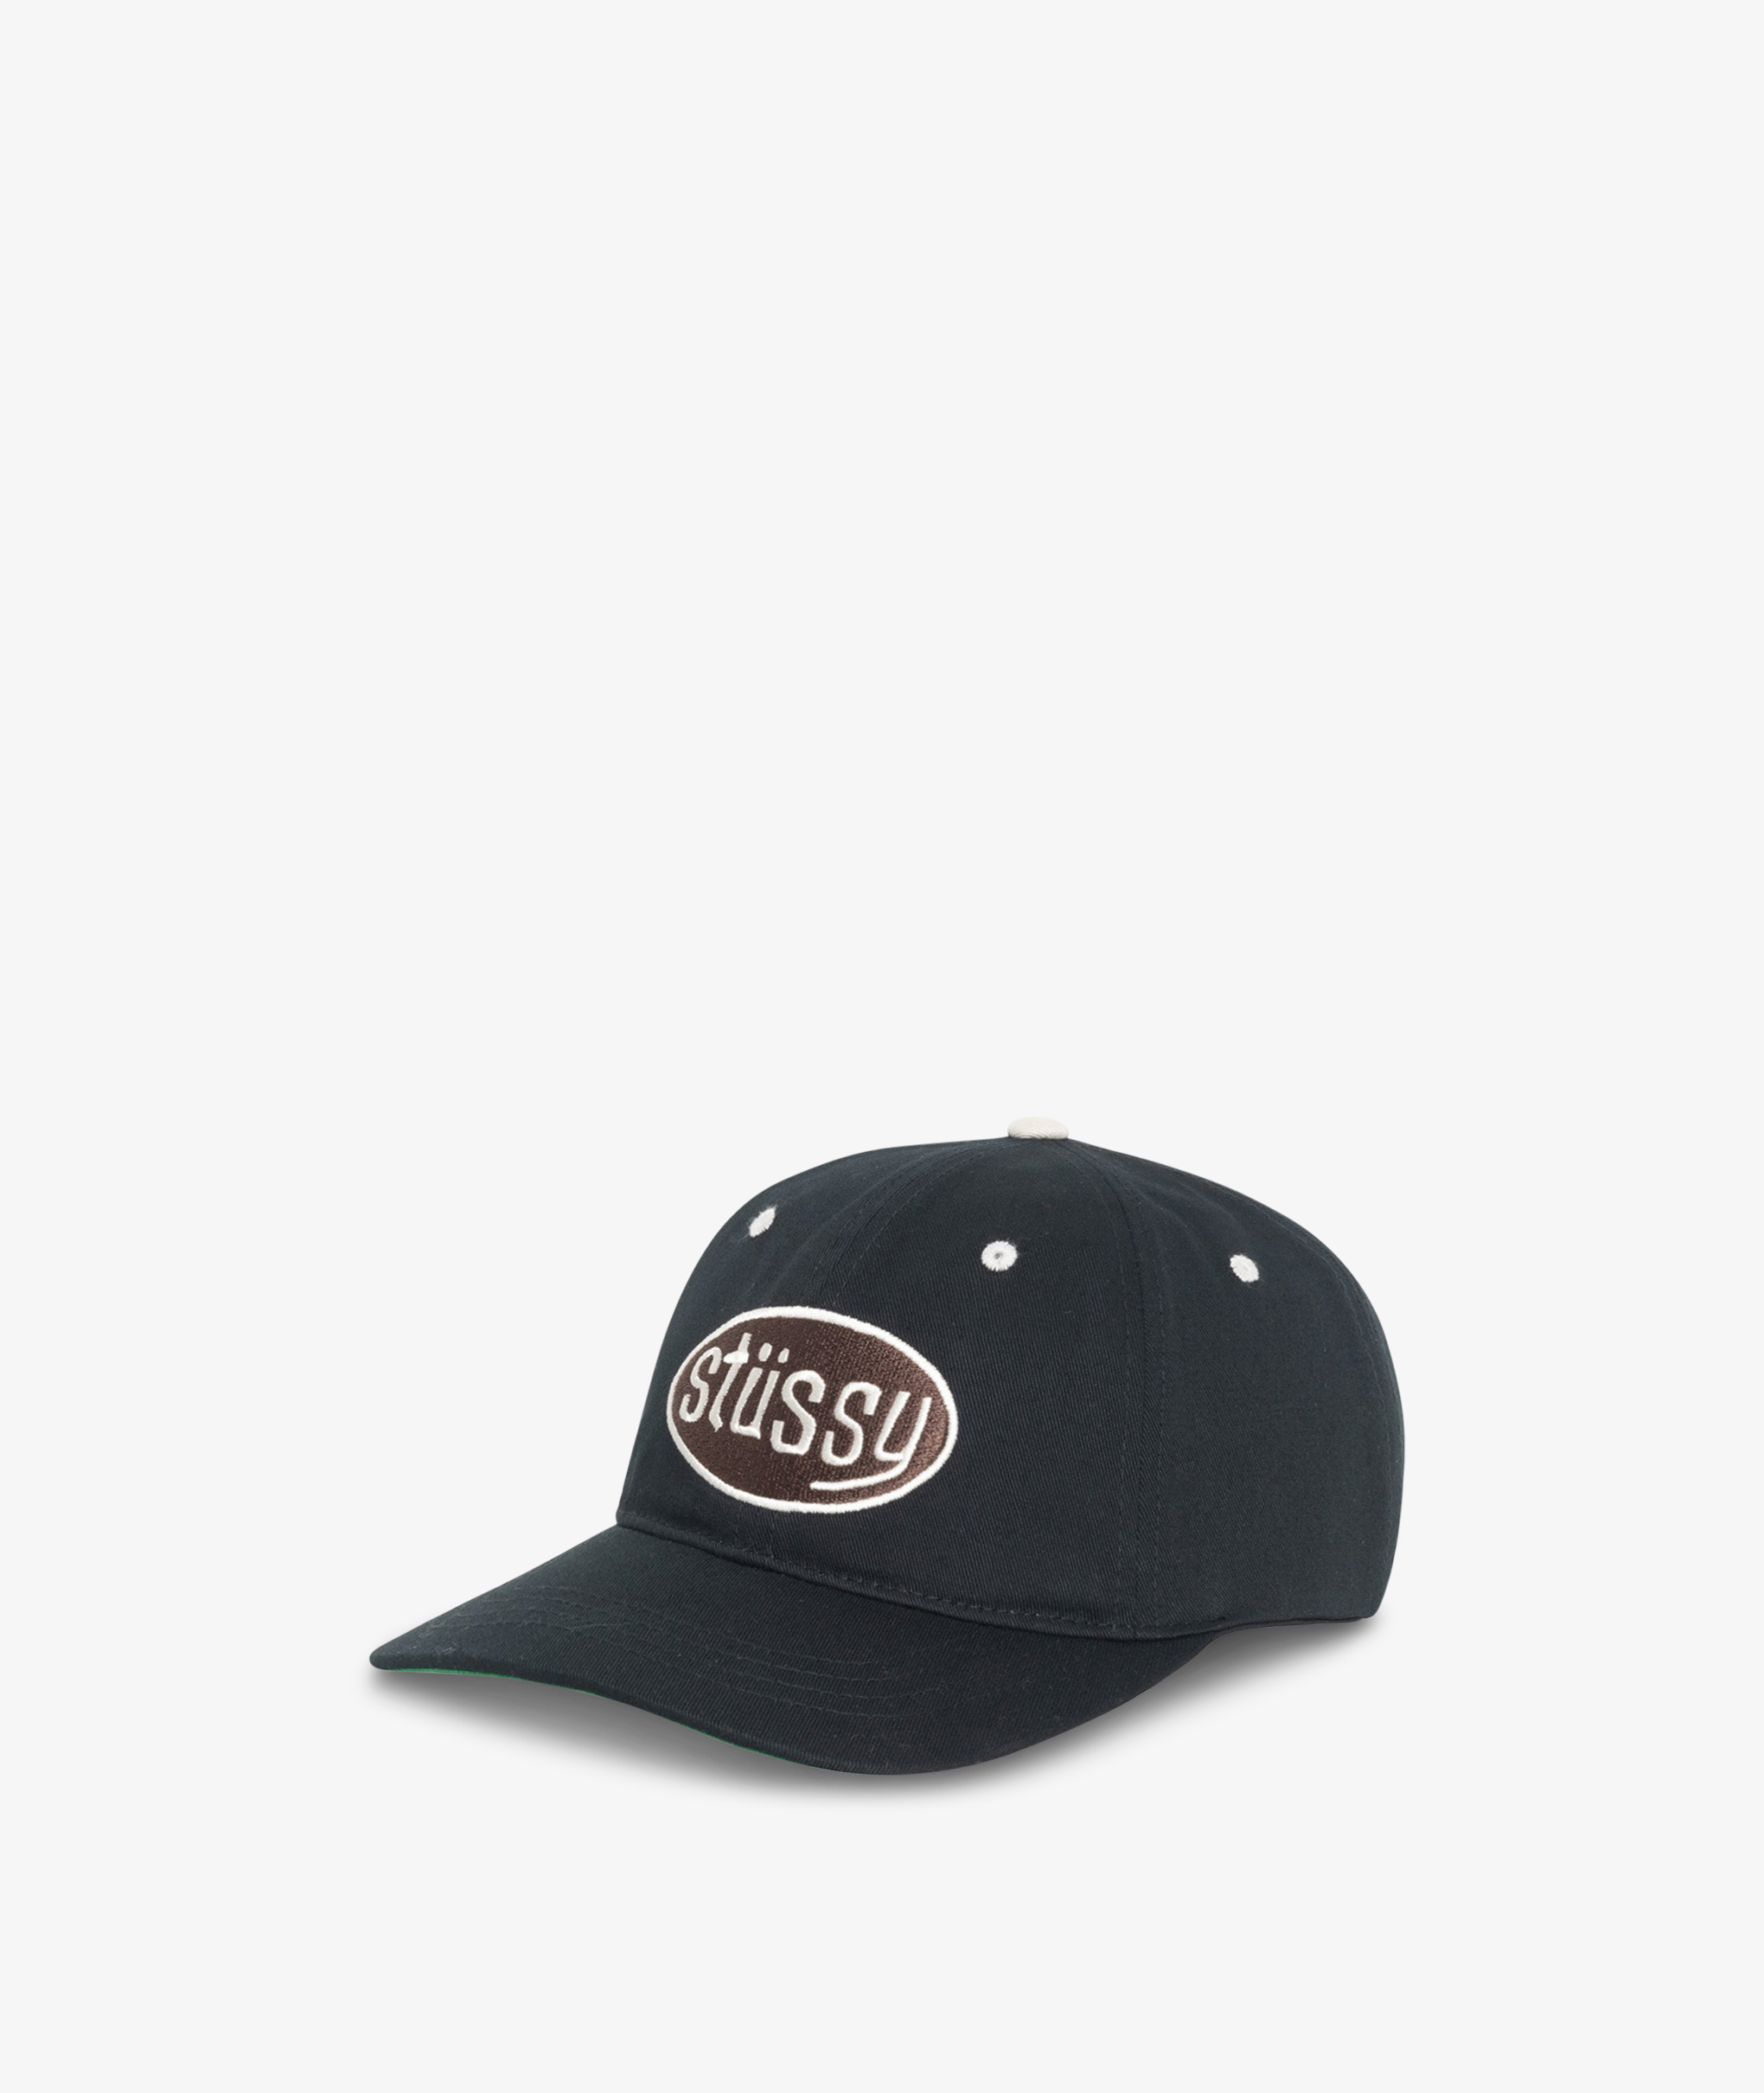 Norse Store | Shipping Worldwide - Stüssy Pitstop Low Pro Cap - Black